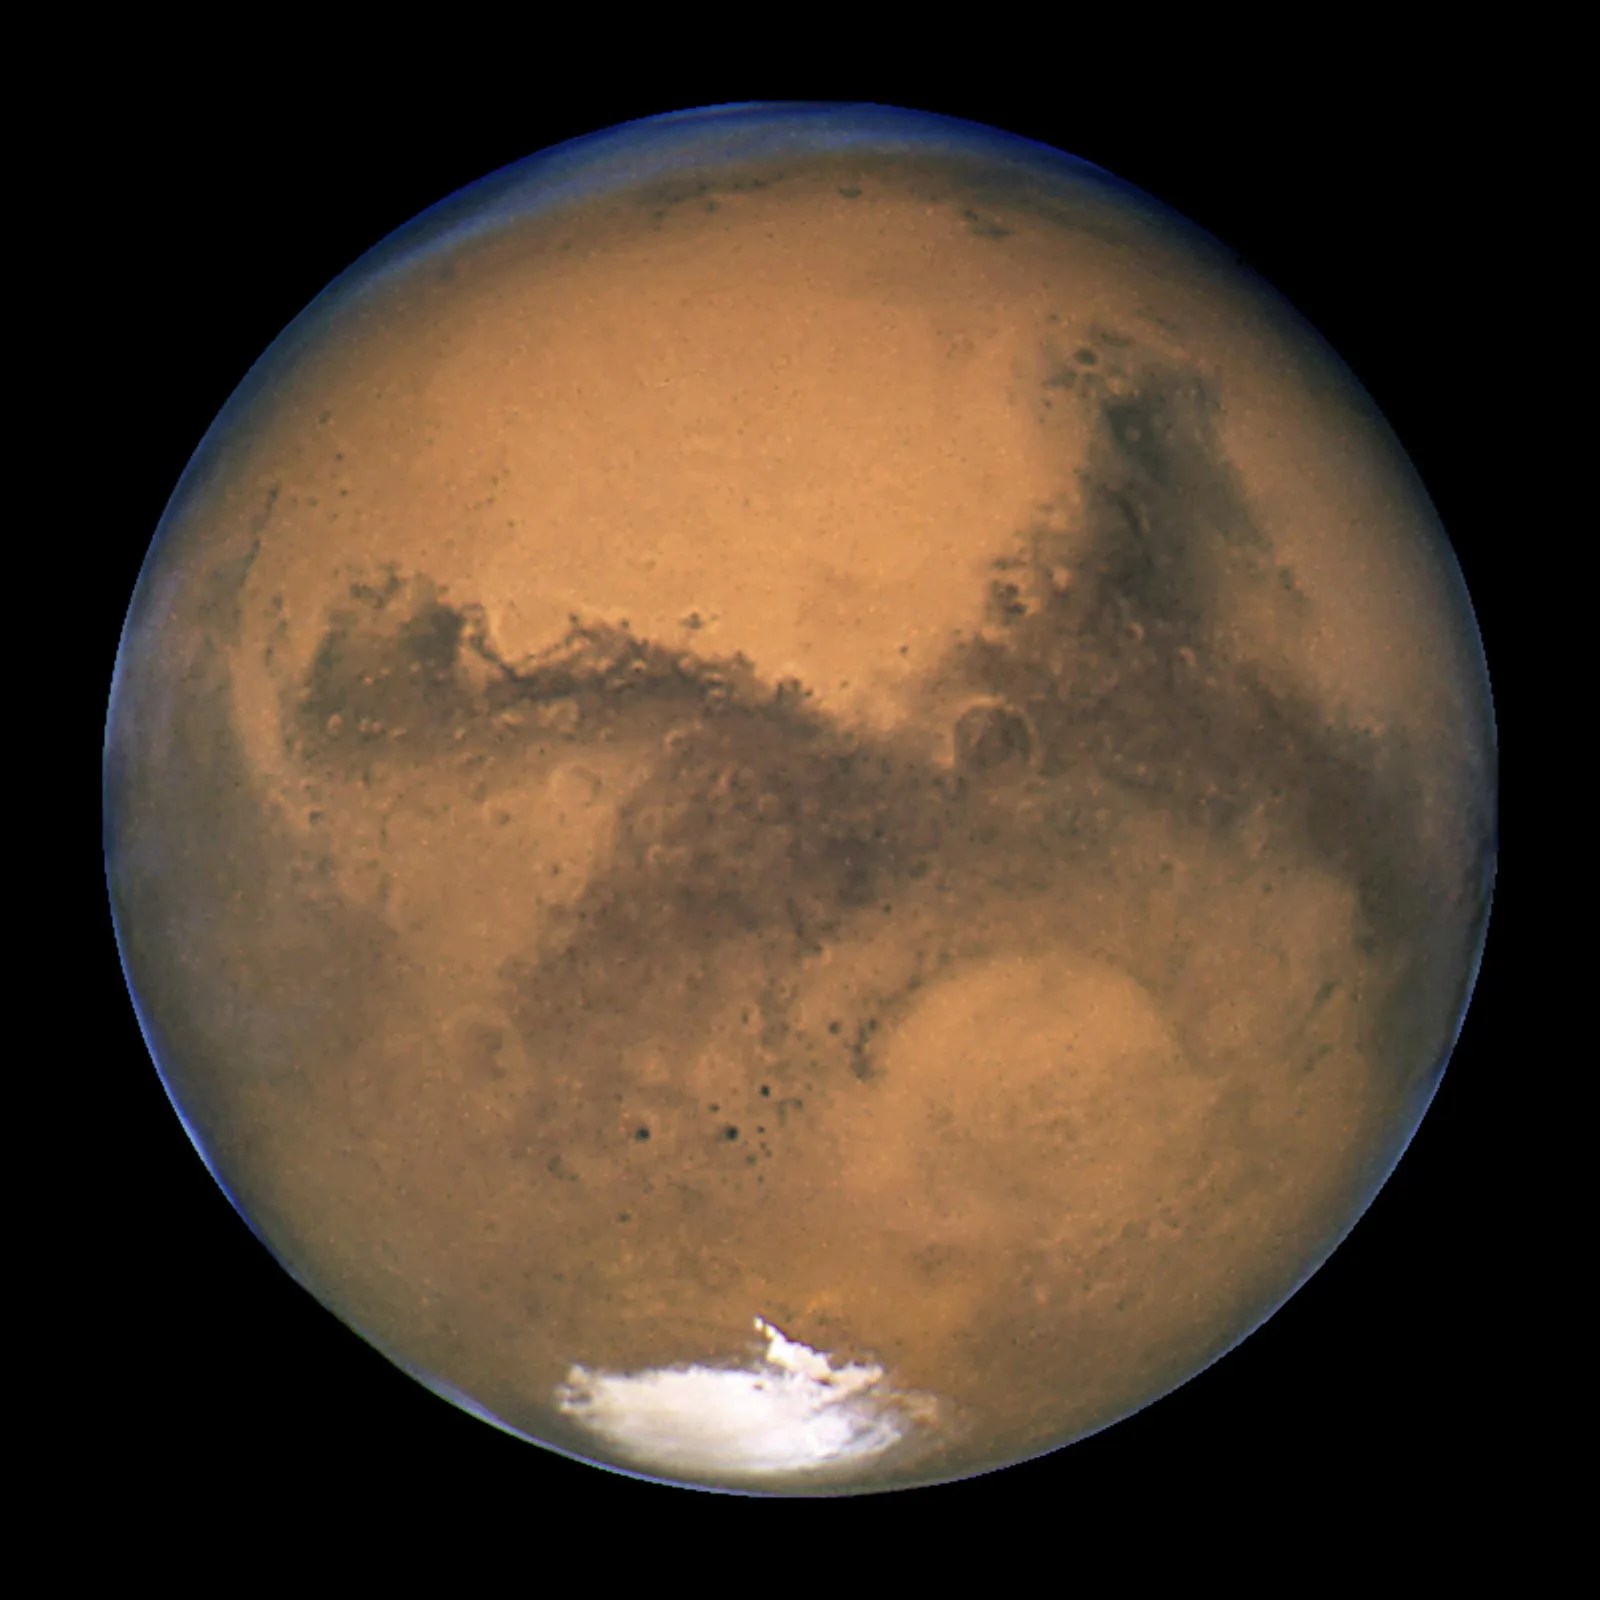 Closeup image of mars with icy-looking patch near south pole